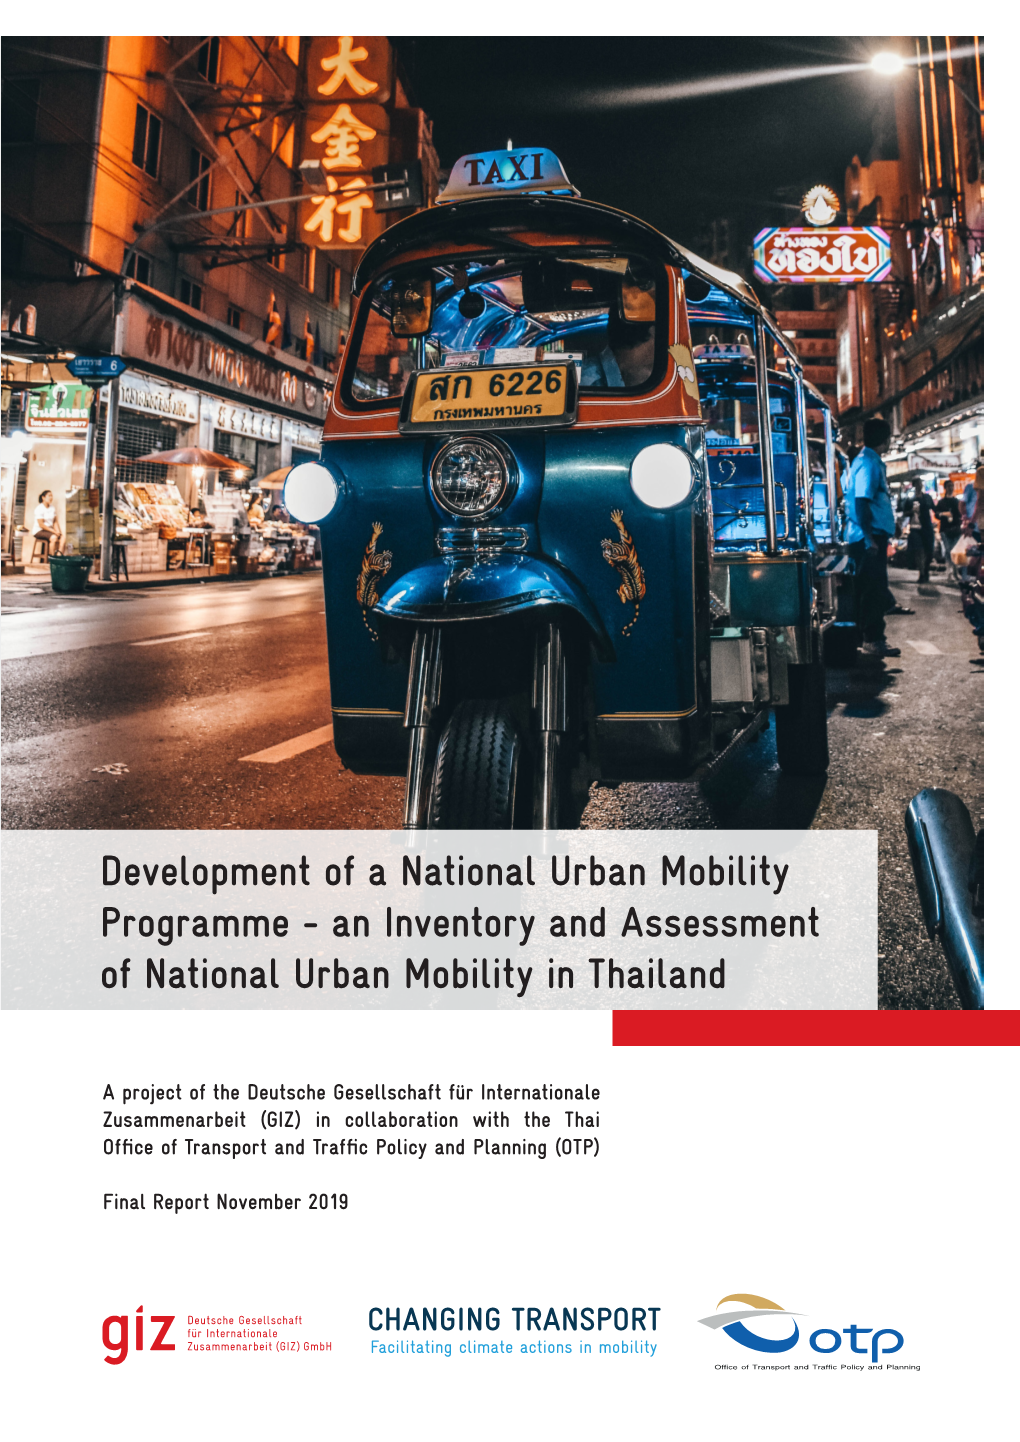 An Inventory and Assessment of National Urban Mobility in Thailand